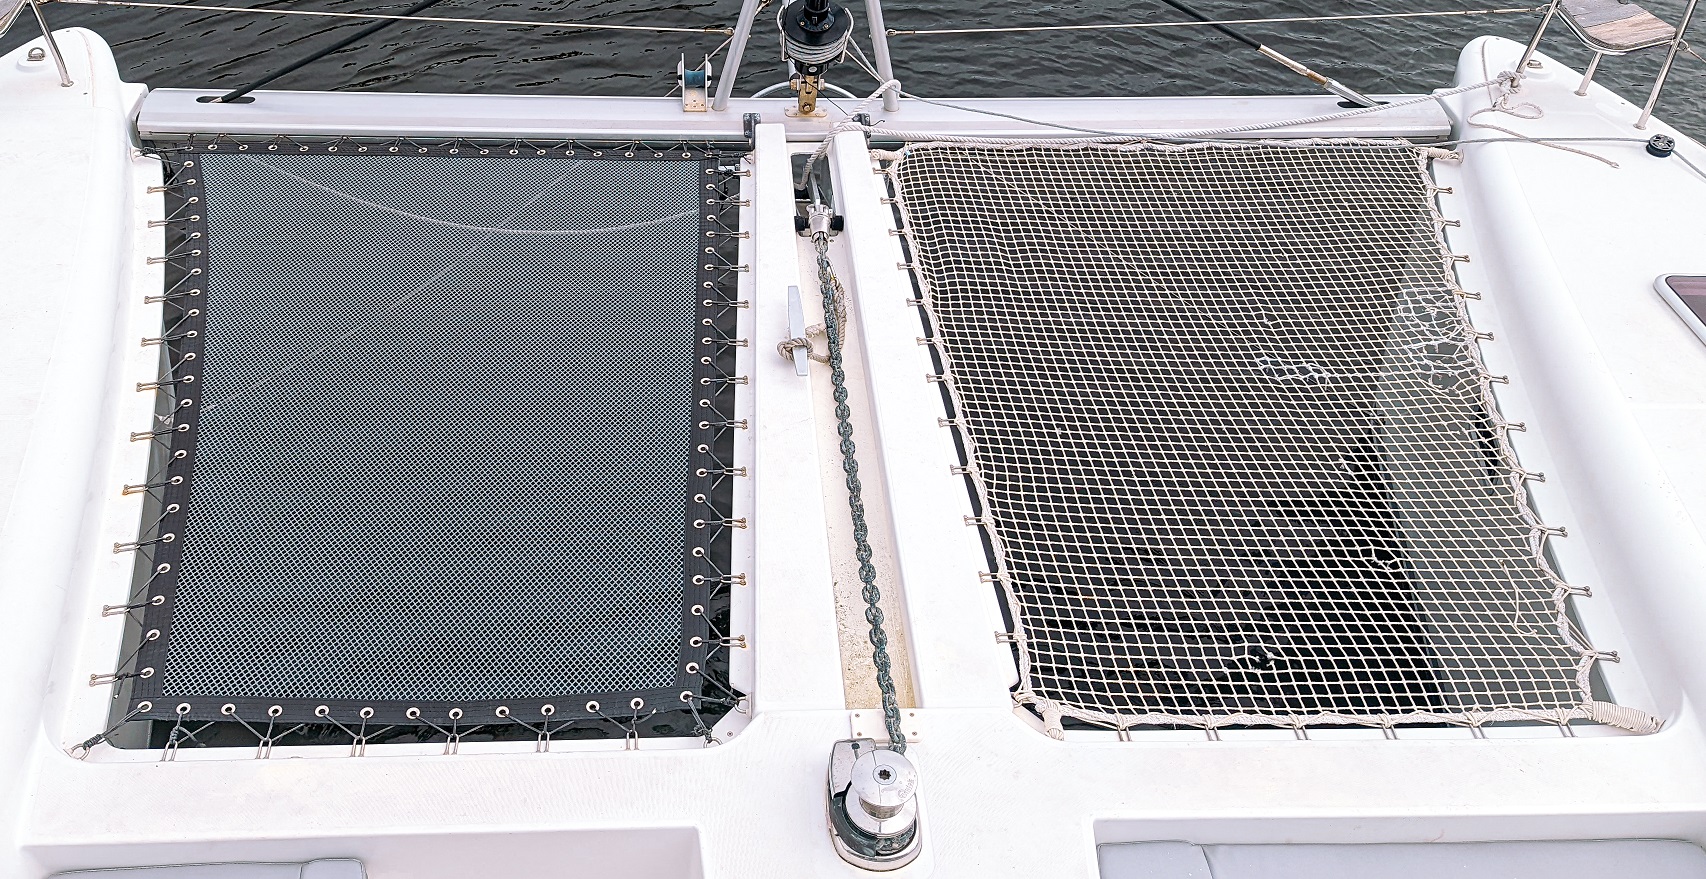 Figure 1: Which of these nets would you prefer to have on your boat?